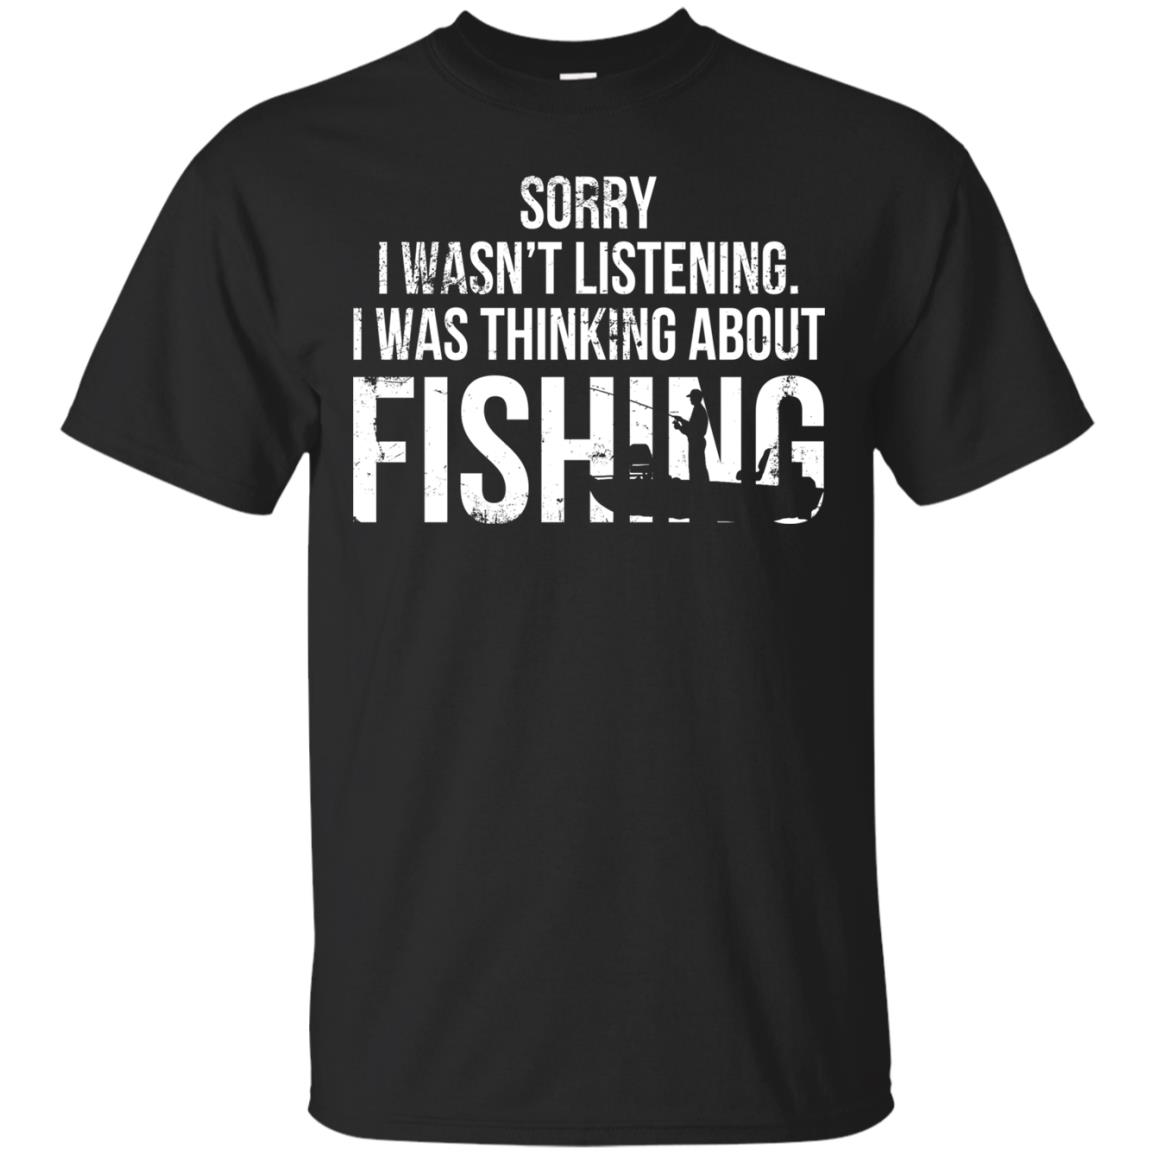 Sorry I Wasn't Listening - I Was Thinking About Fishing Shirt